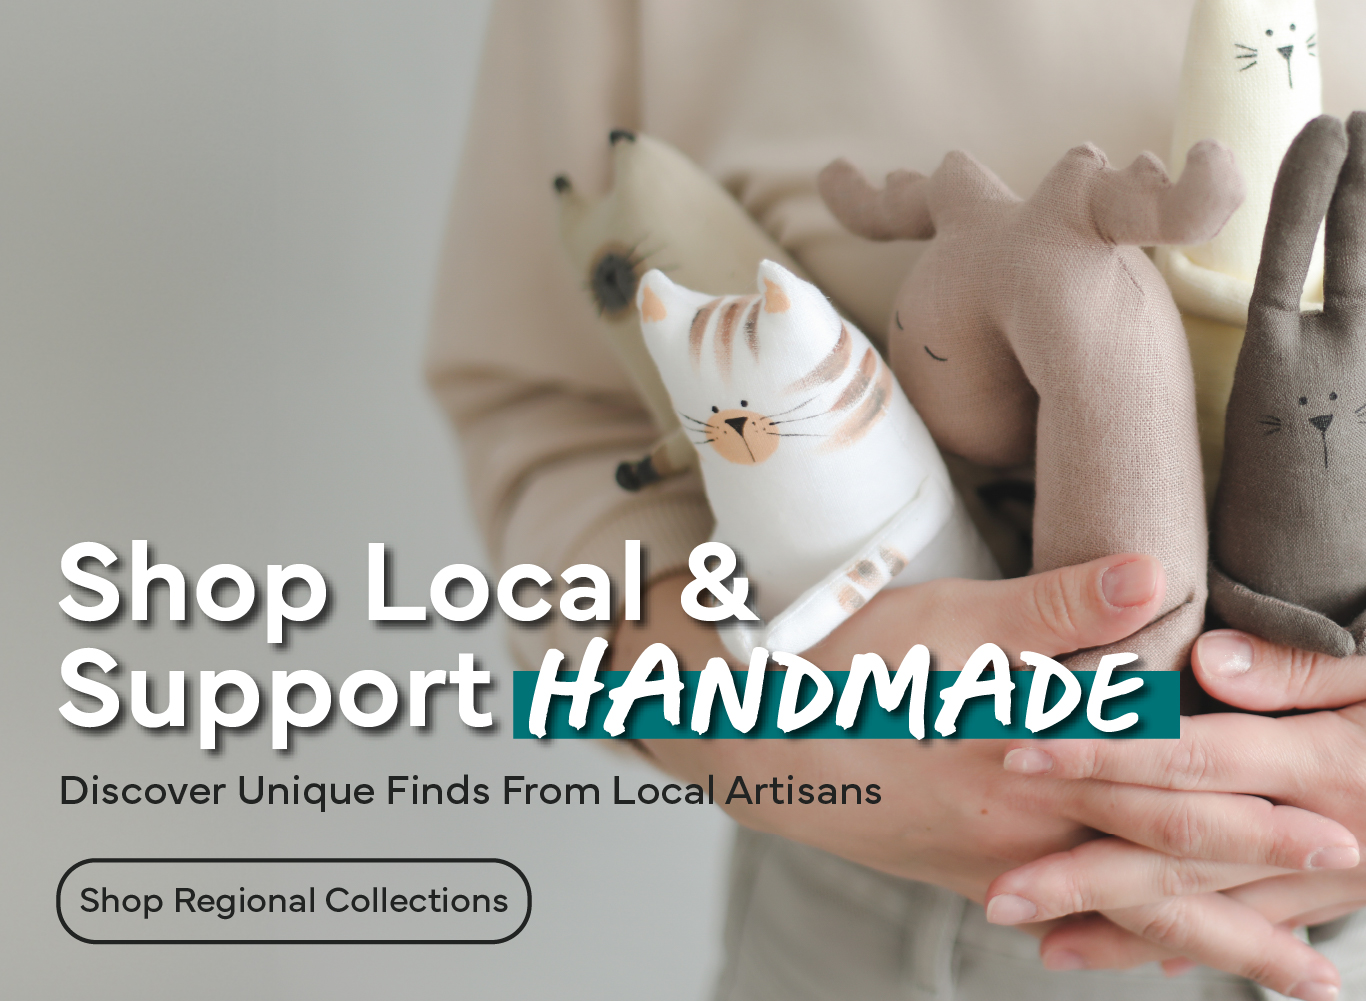 Shop Local & Support Handmade. Discover local makers and artists.